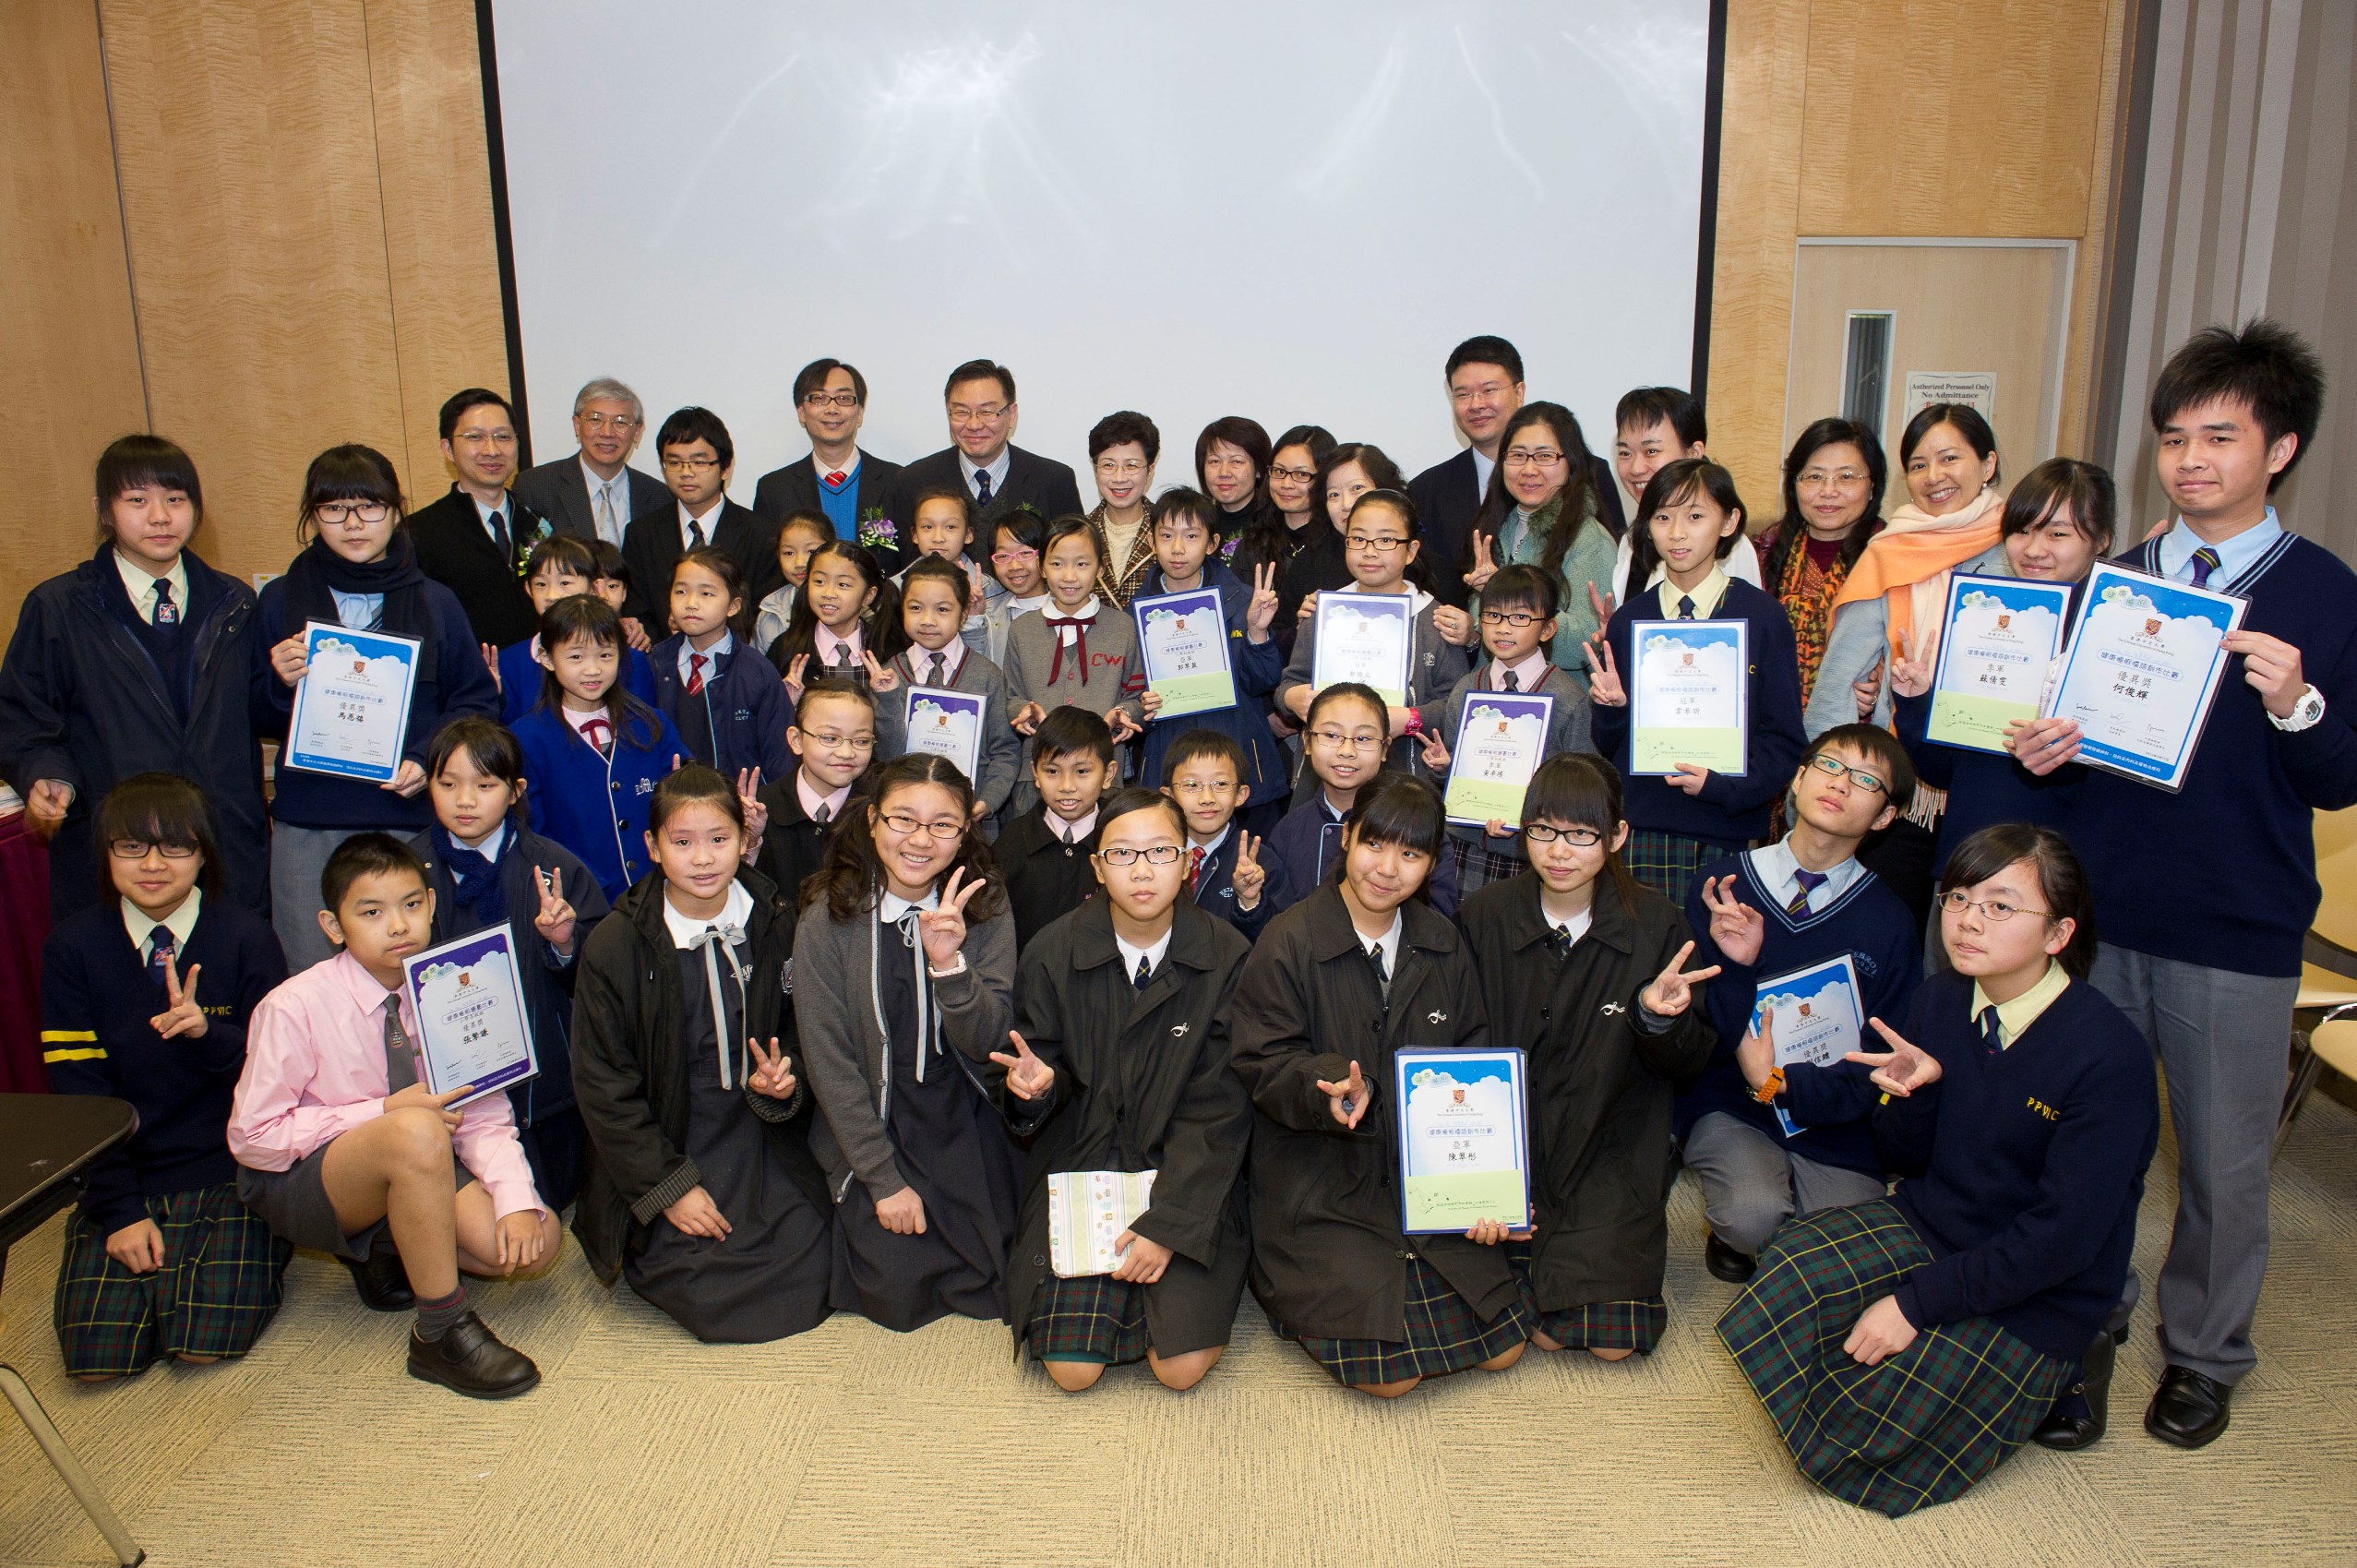 CUHK's research team, some of the students receiving awards from the Healthy Sleep Painting Competition and Healthy Sleep Slogan Competition of the territory-wide Sleep Health Education and Intervention Campaign, together with their school headmasters and teachers